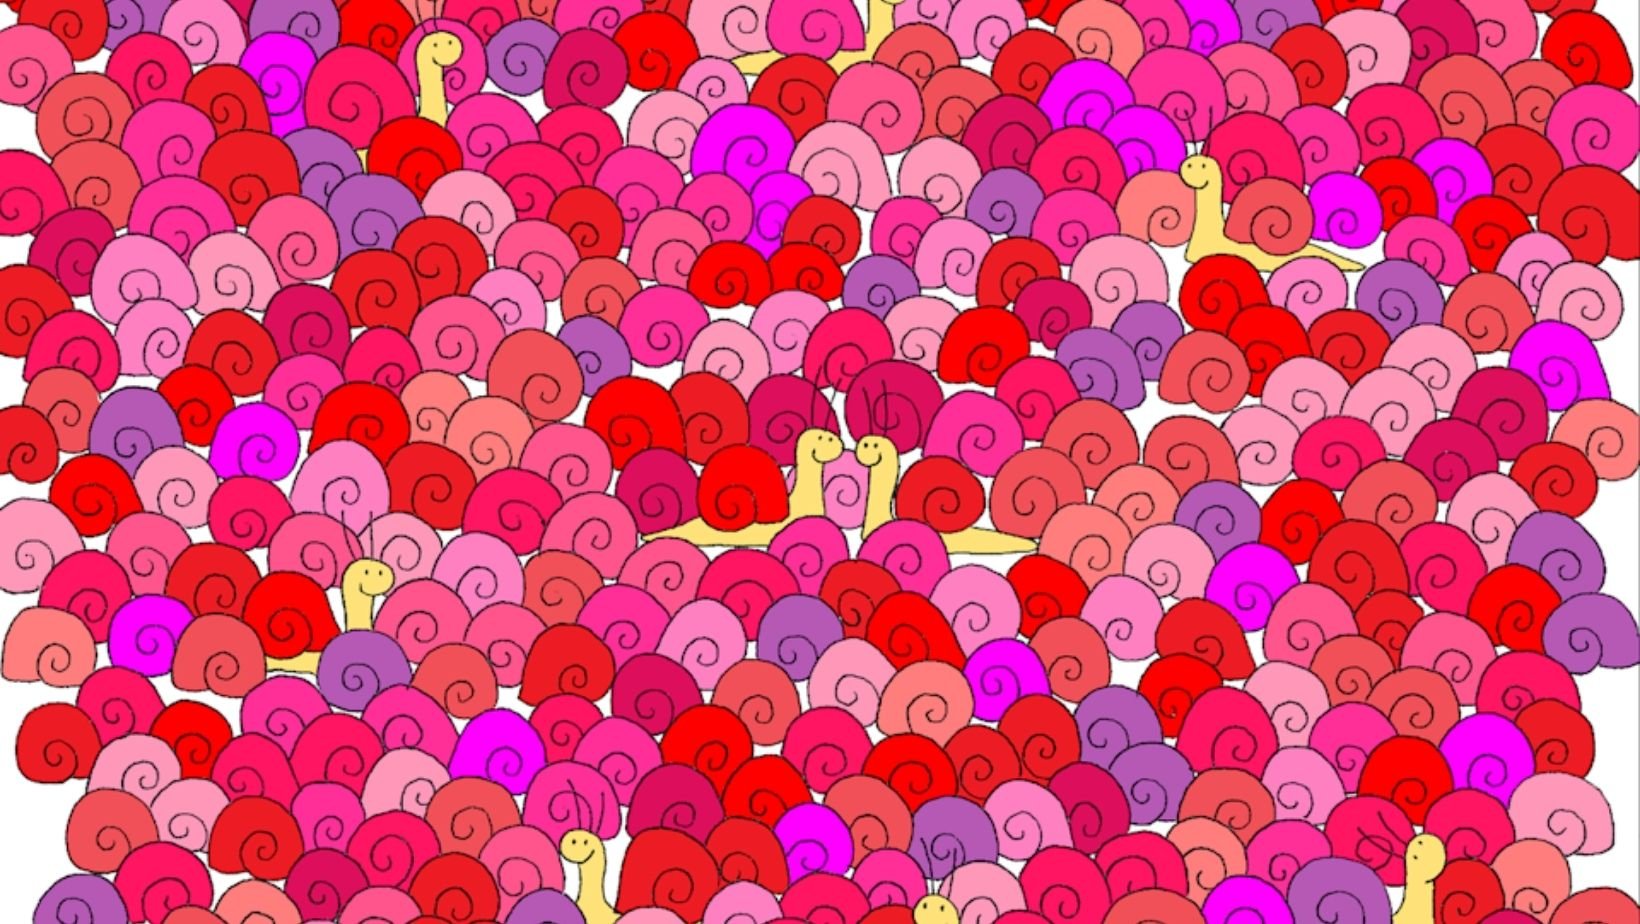 small joys thumbnail 16.jpg?resize=412,275 - Can You Spot The Hidden ‘HEART’ Among The Colorful Snails?